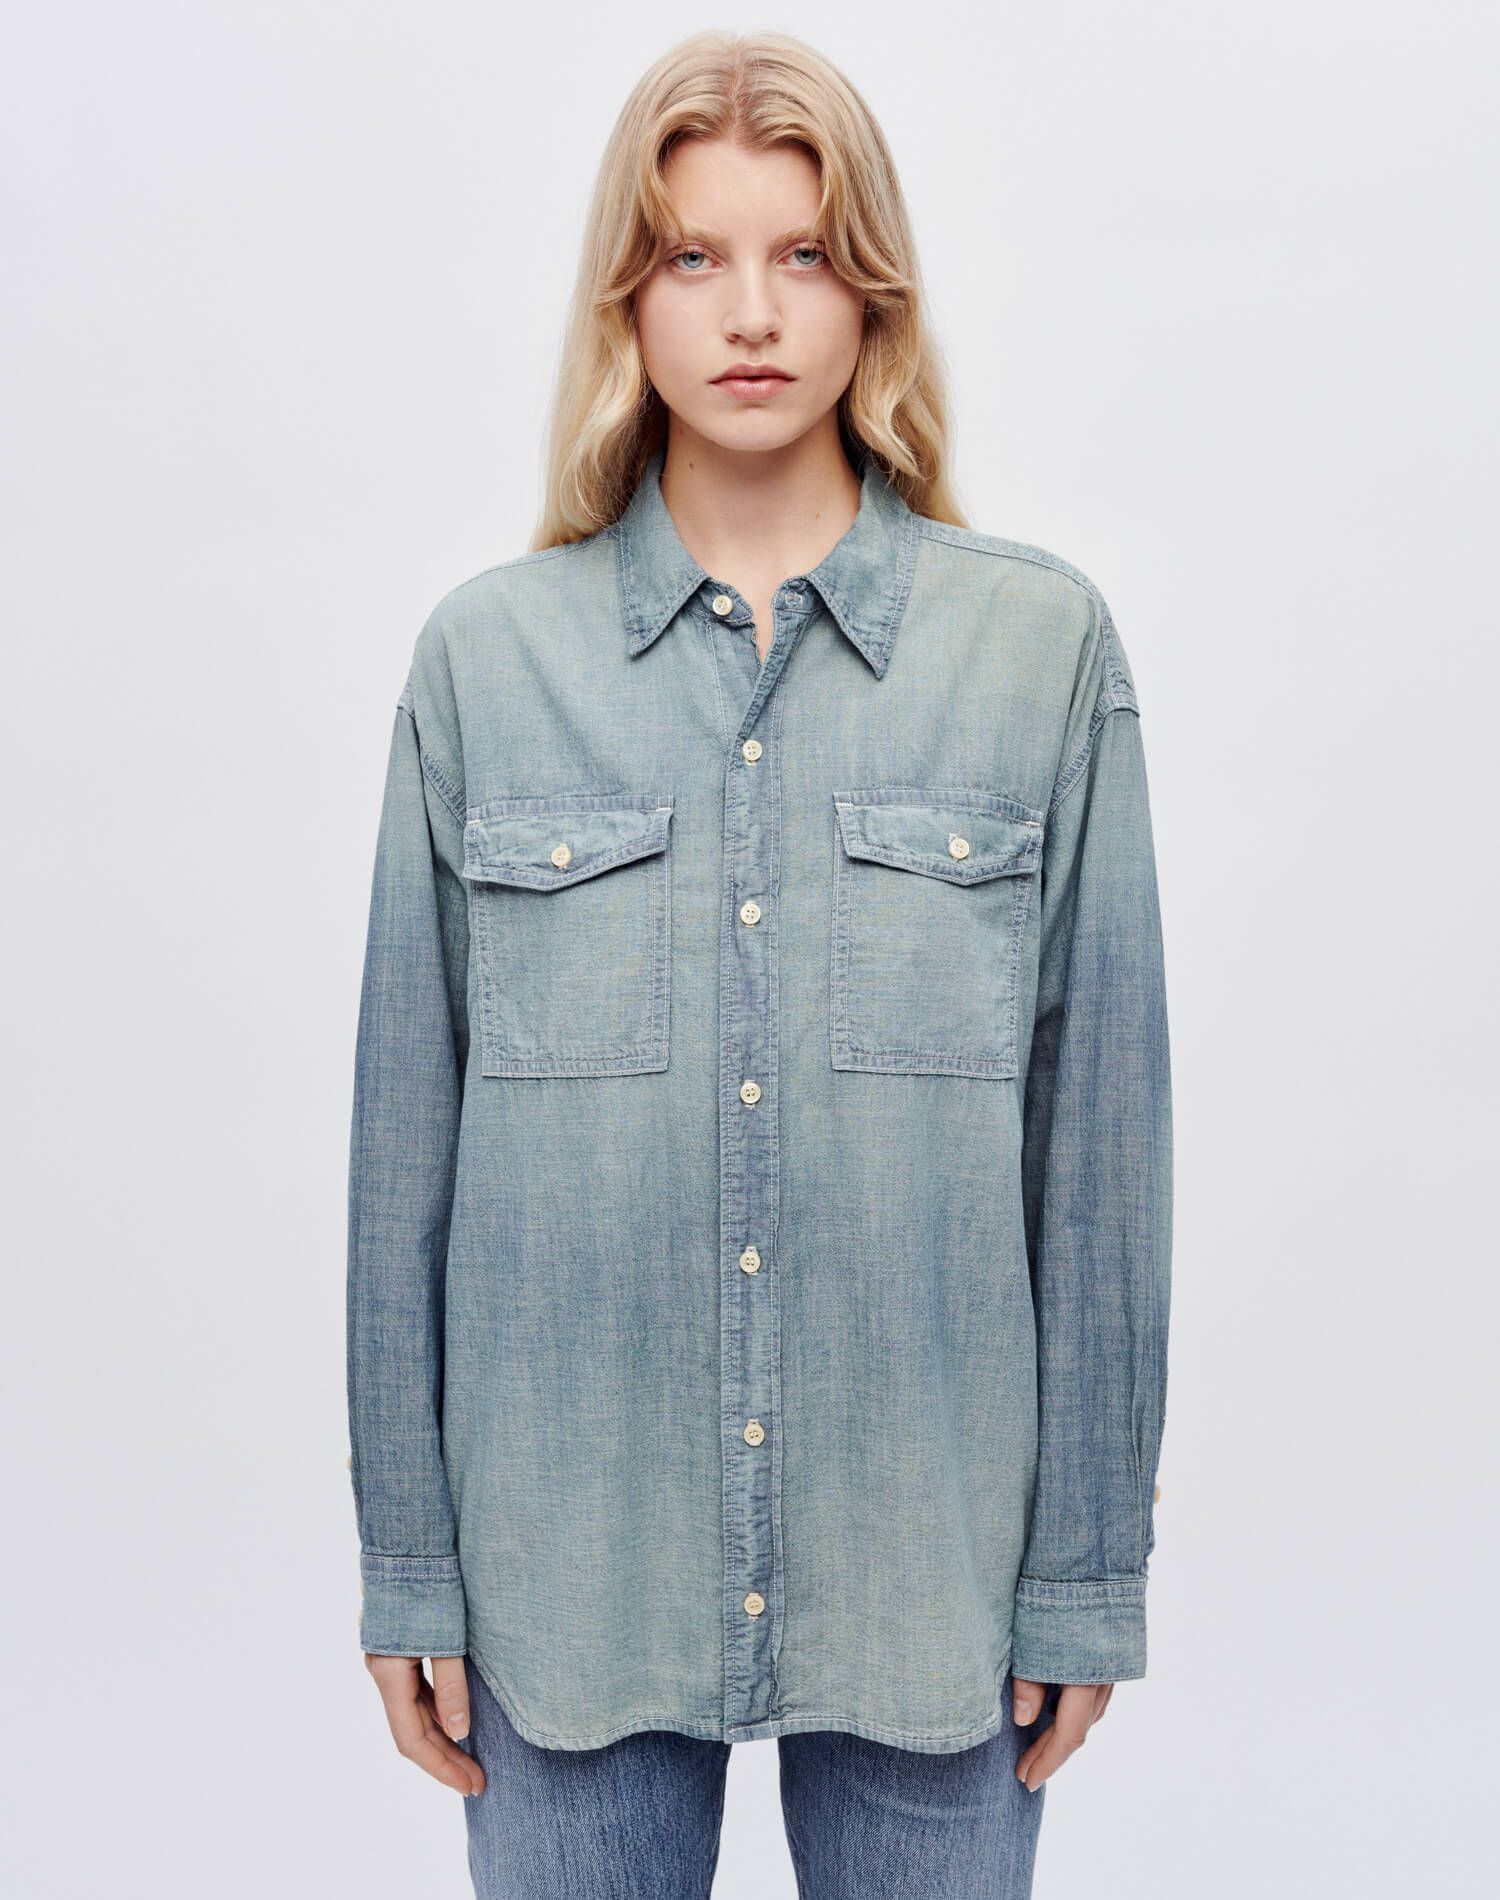 RE/DONE & Pam | Chambray Oversized Shirt in Paradise Cove | RE/DONE